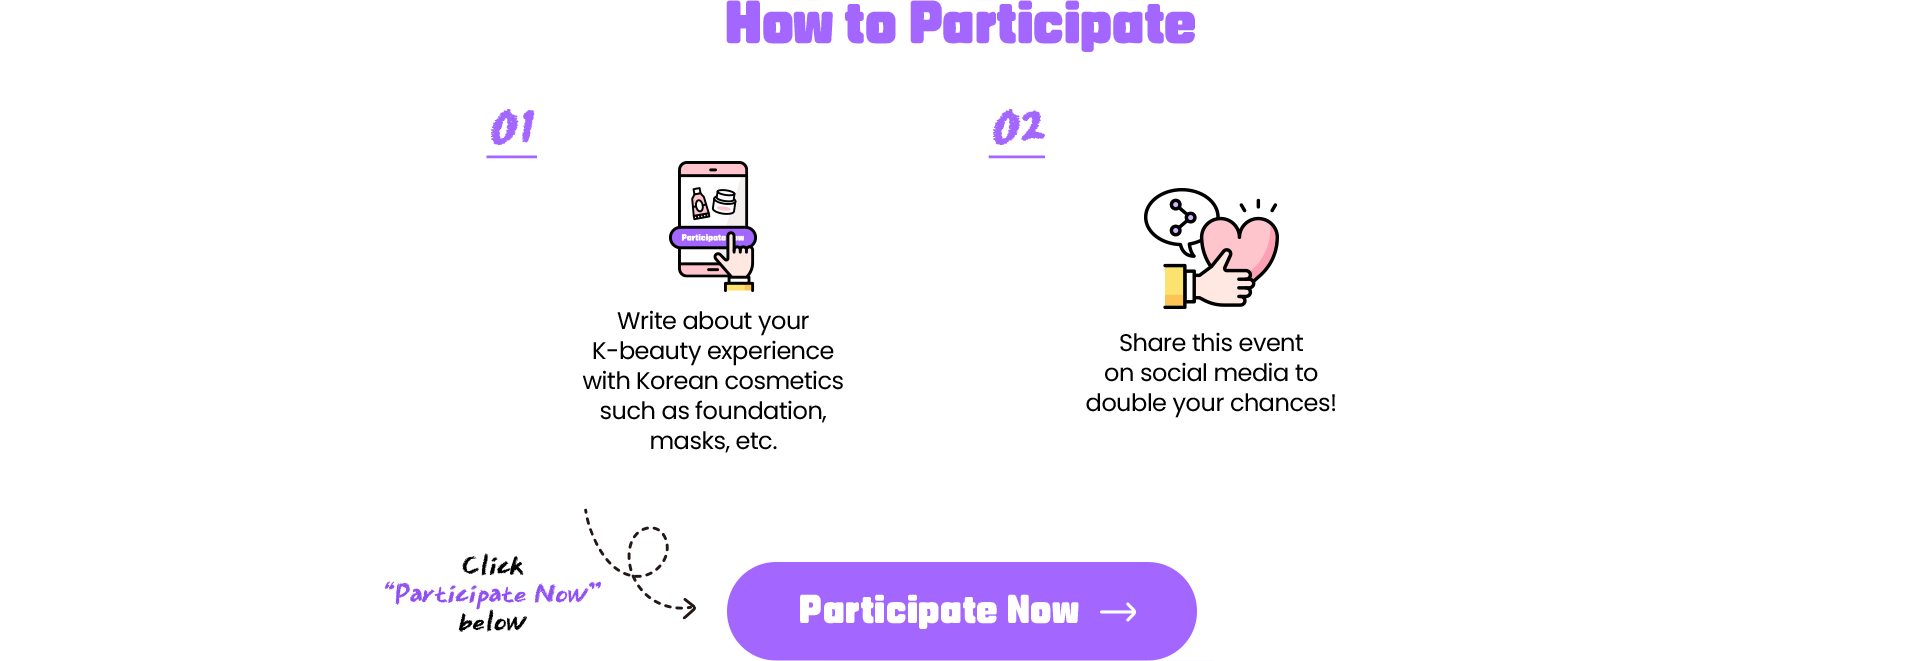 How to Participate Write about your K-beauty experience with Korean cosmetics such as foundation, masks, etc. (Click “Participate Now” below) Share this event on social media to double your chances!